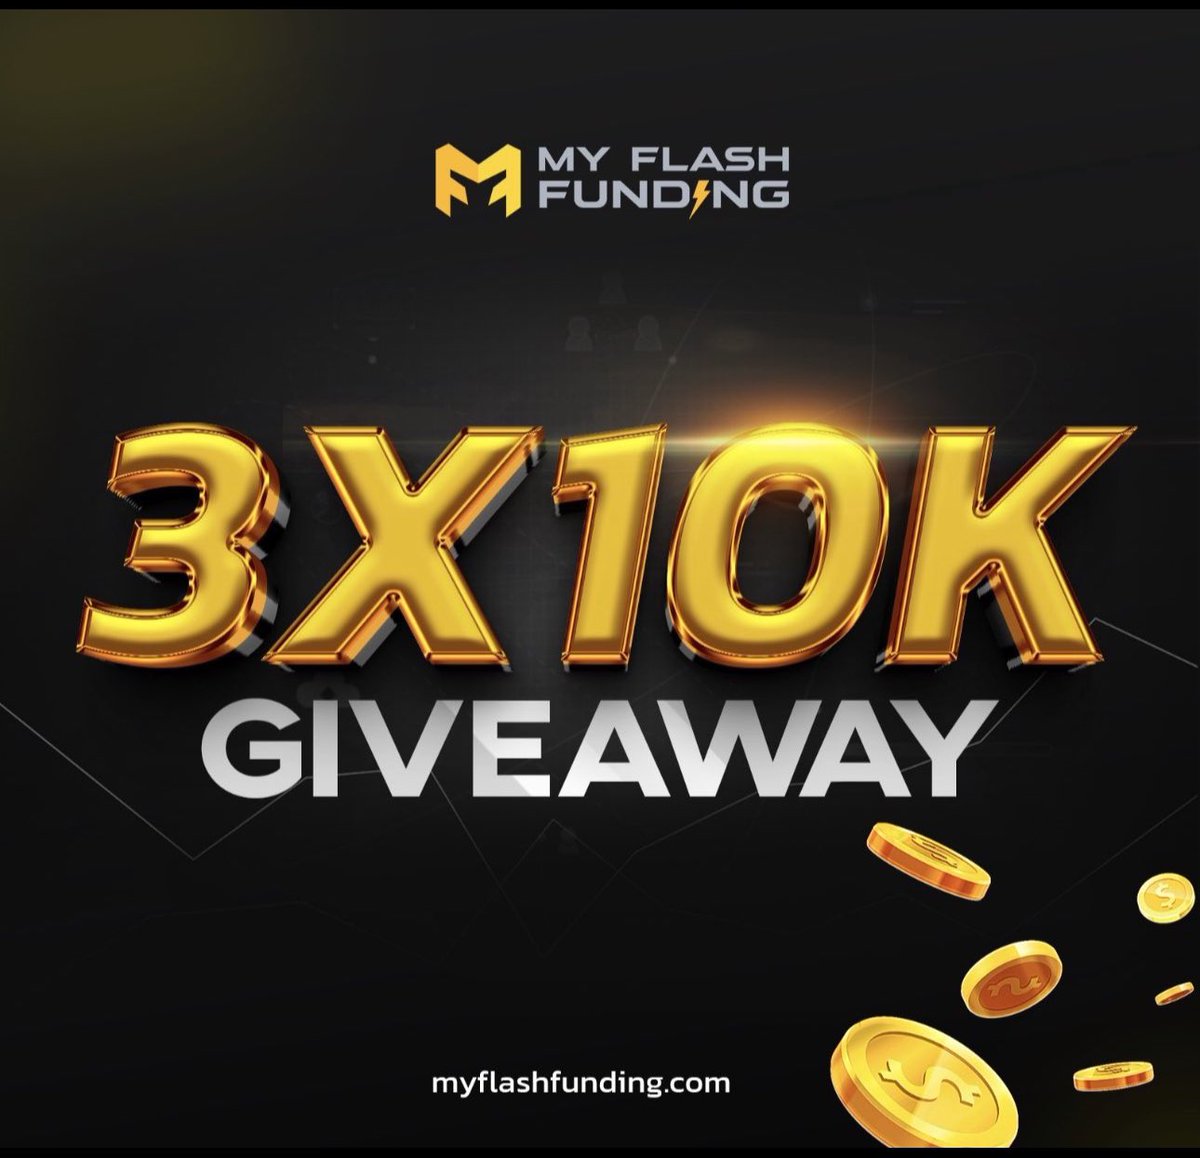 HELLO EVERYONE 🙌 new giveaway 🎁 With my partener «@myflashfunding we decided to offer you 3x10k account with and they are running amazing promotion too you can buy an account with the link in my bio - to participate - RETWEET THIS TWEET 🔁 - LIKE THIS TWEET ❤️ - TAG 3…